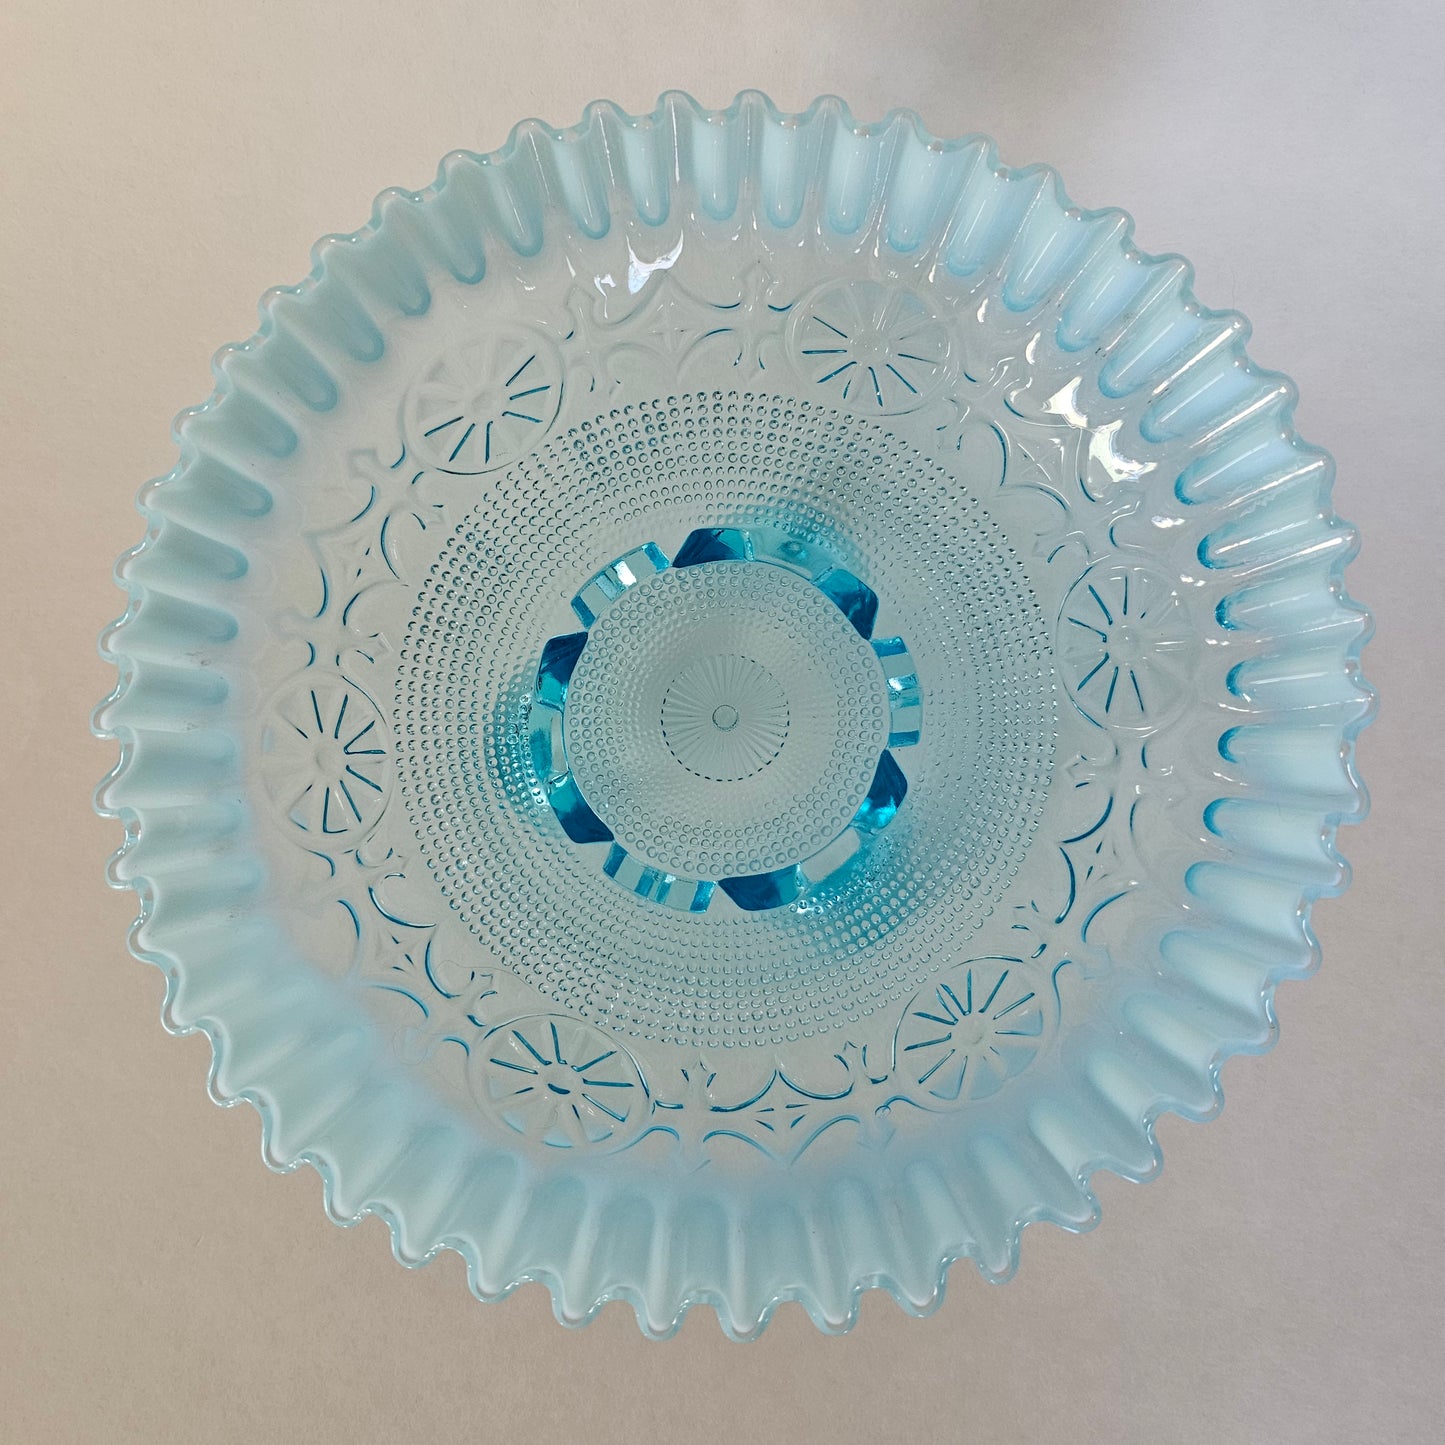 Vintage Blue Opalescent Jefferson Wheel And Gate Footed Glass Bowl